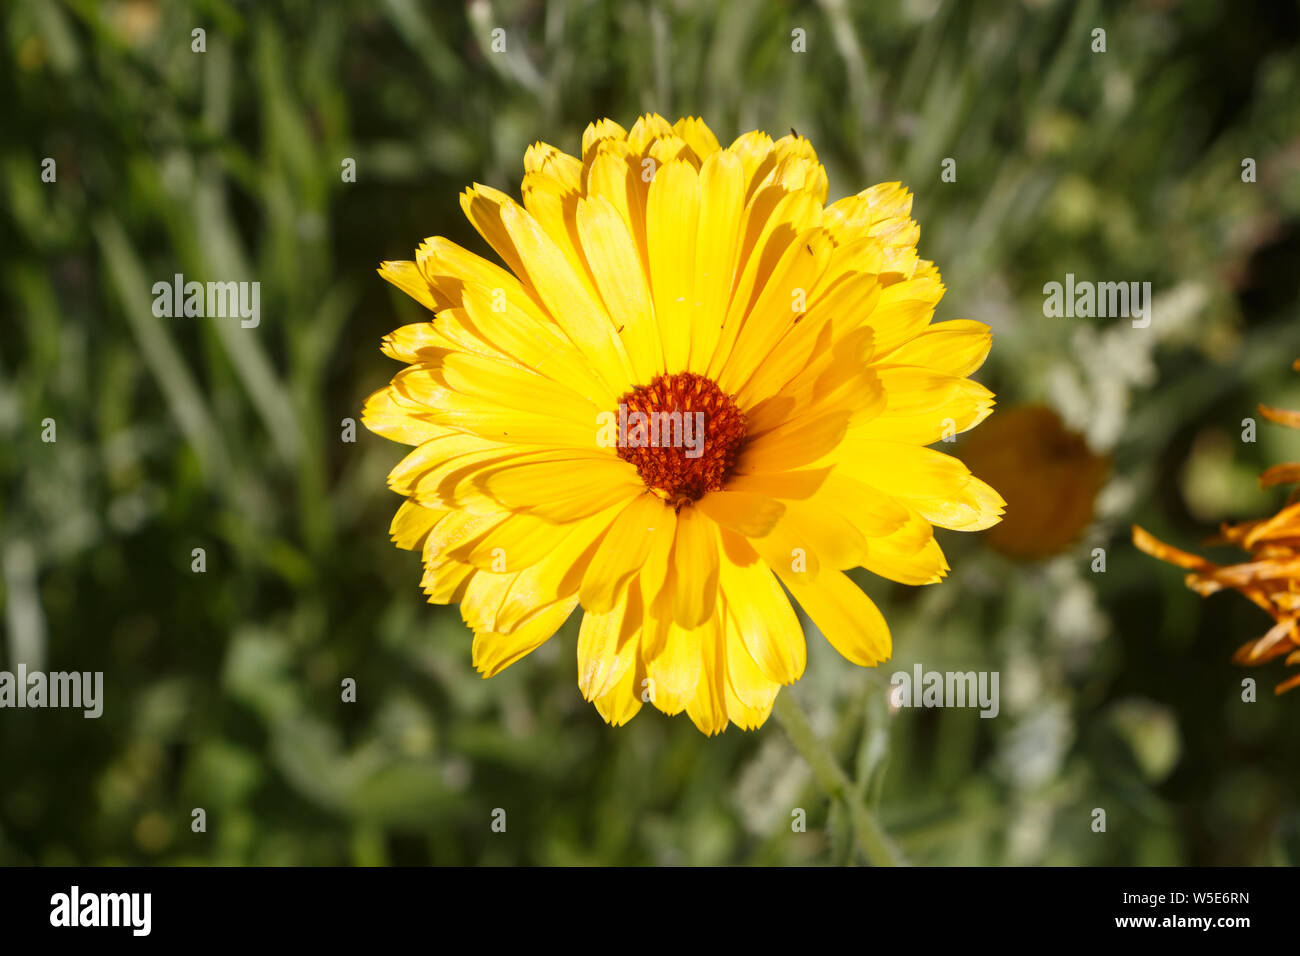 Yellow common marigold flower in a field during summer Stock Photo